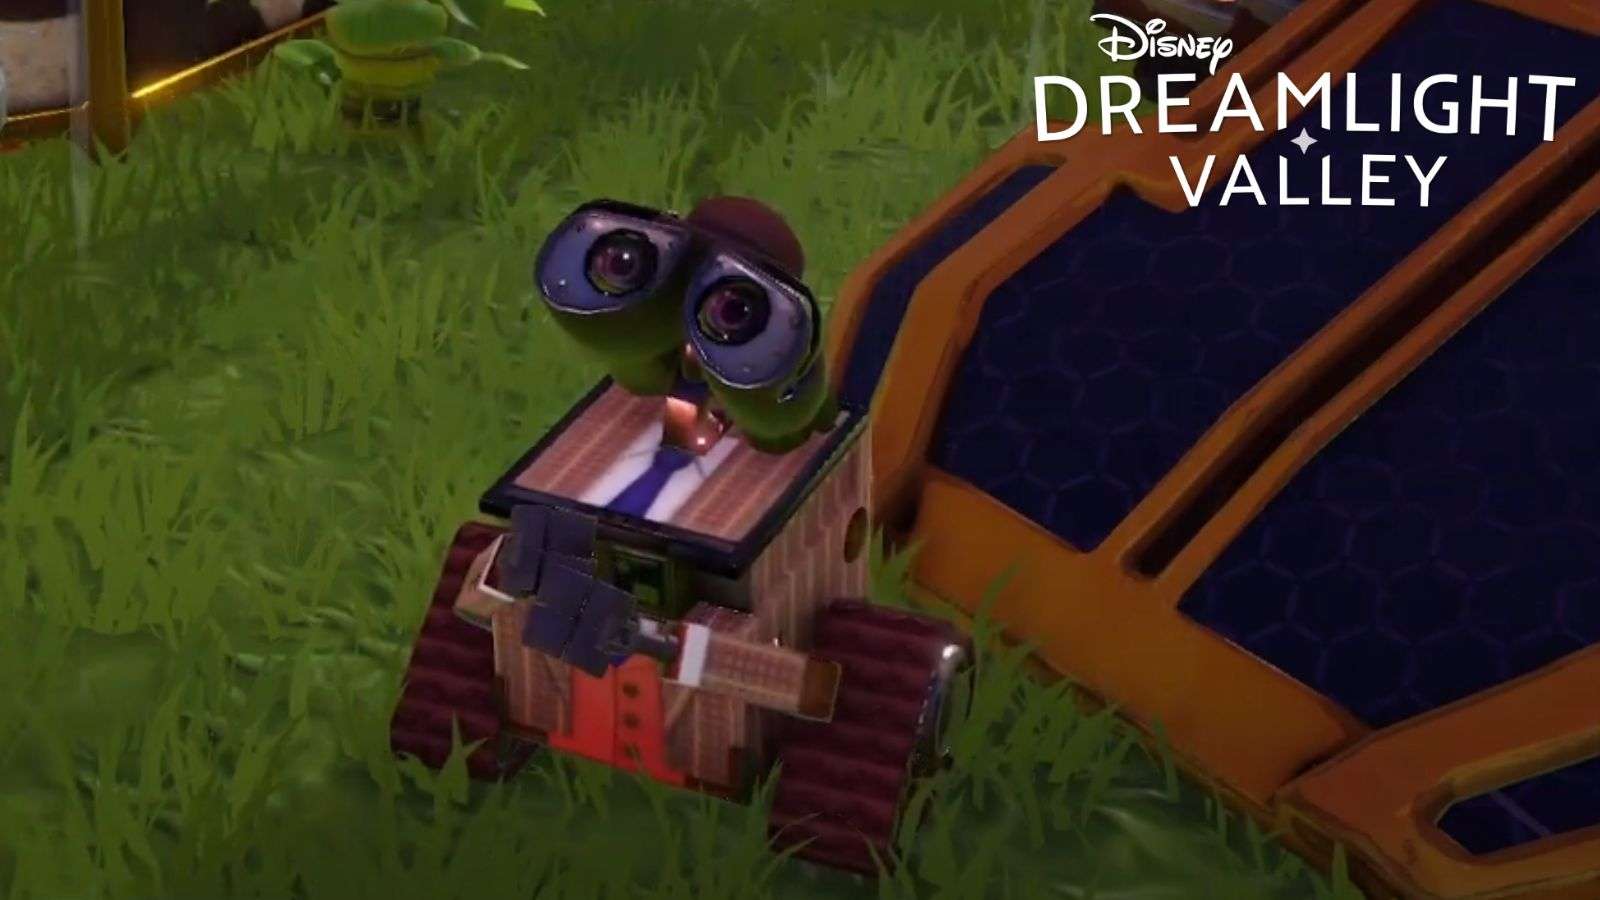 Disney Dreamlight Valley updates provide more magical gameplay